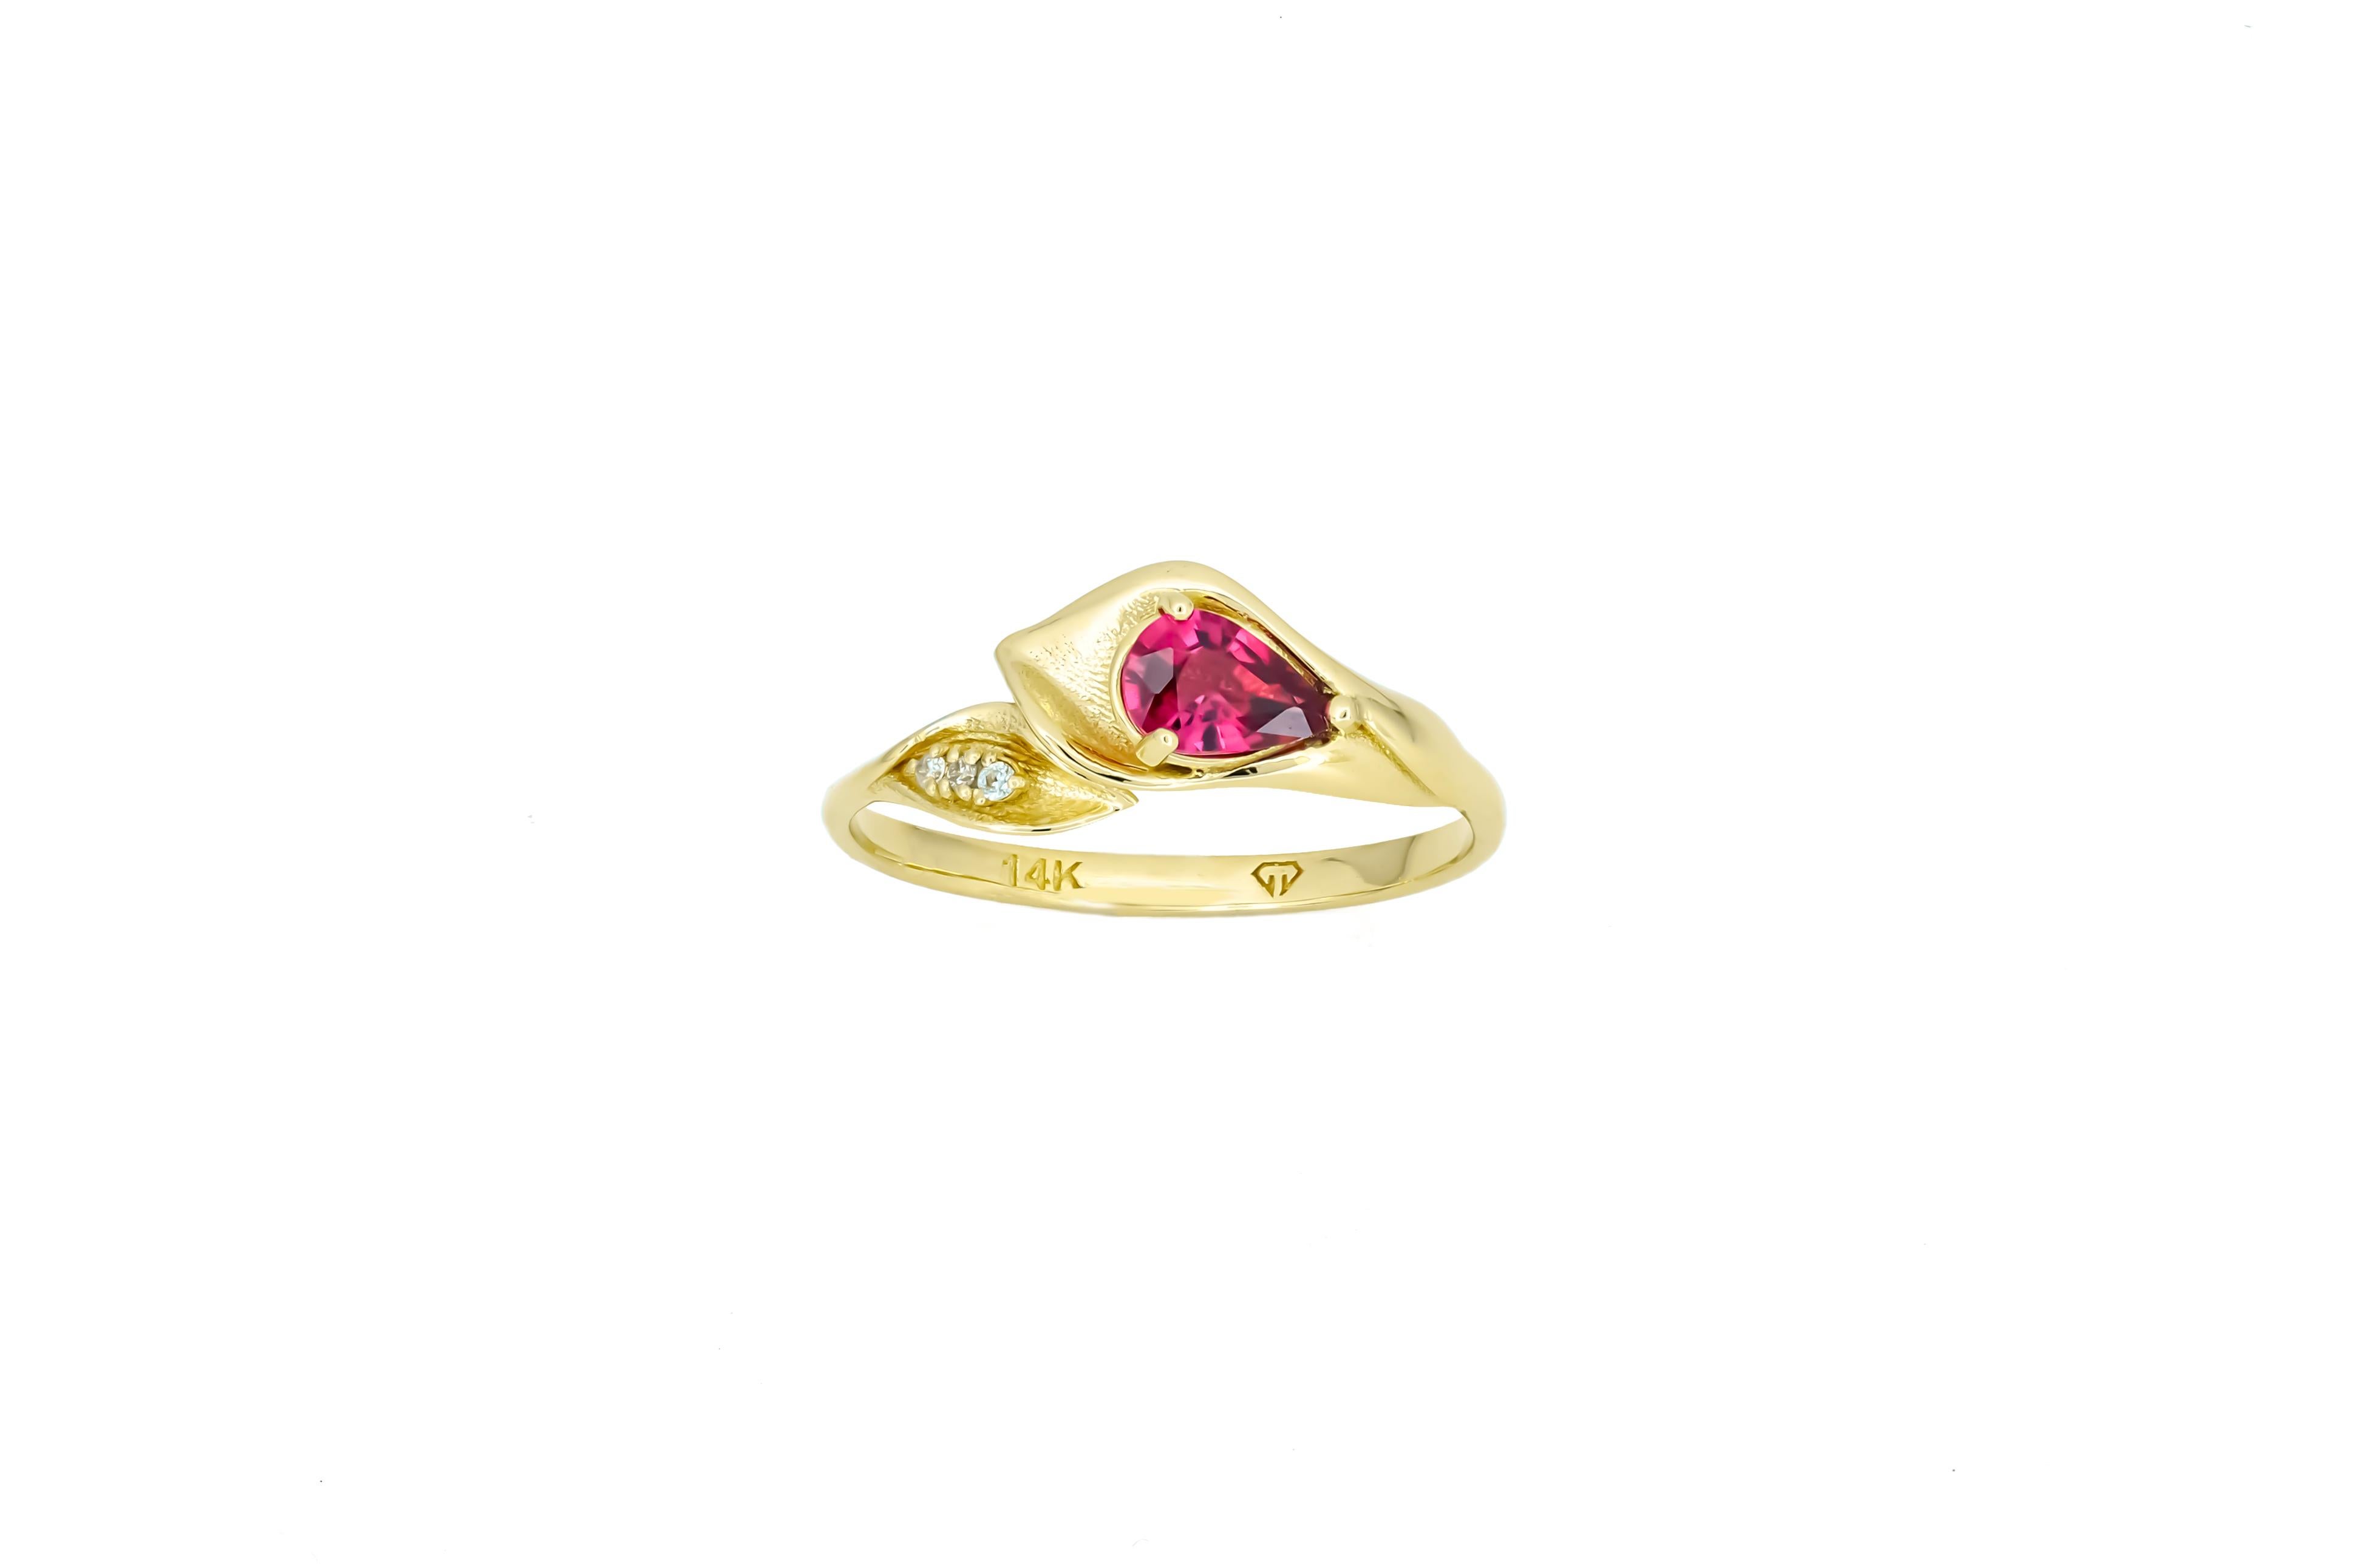 Lily Calla Gold Ring, 14 Karat Gold Ring with Garnet and Diamonds 4